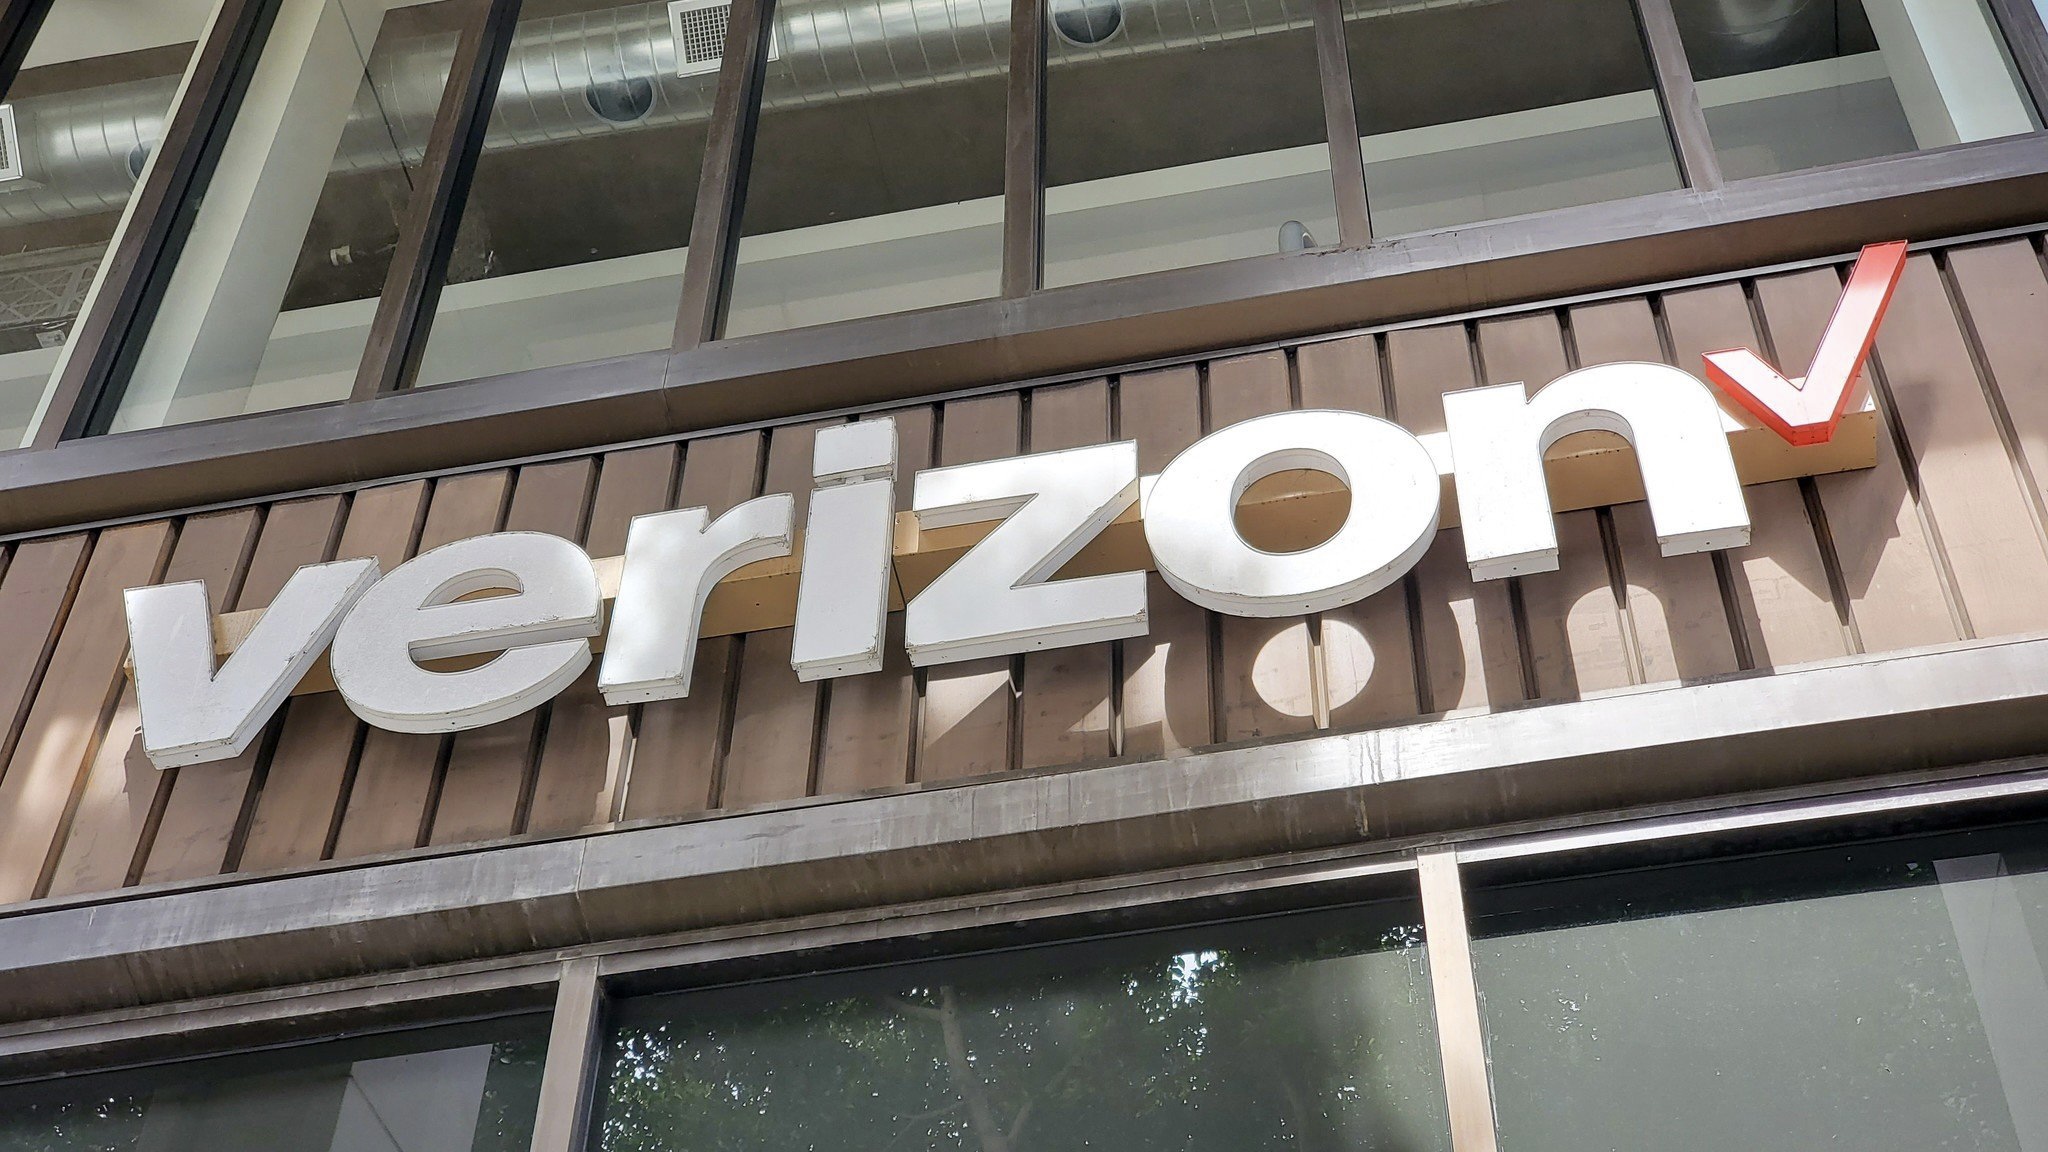 Verizon is raising its prices soon with higher administrative fees